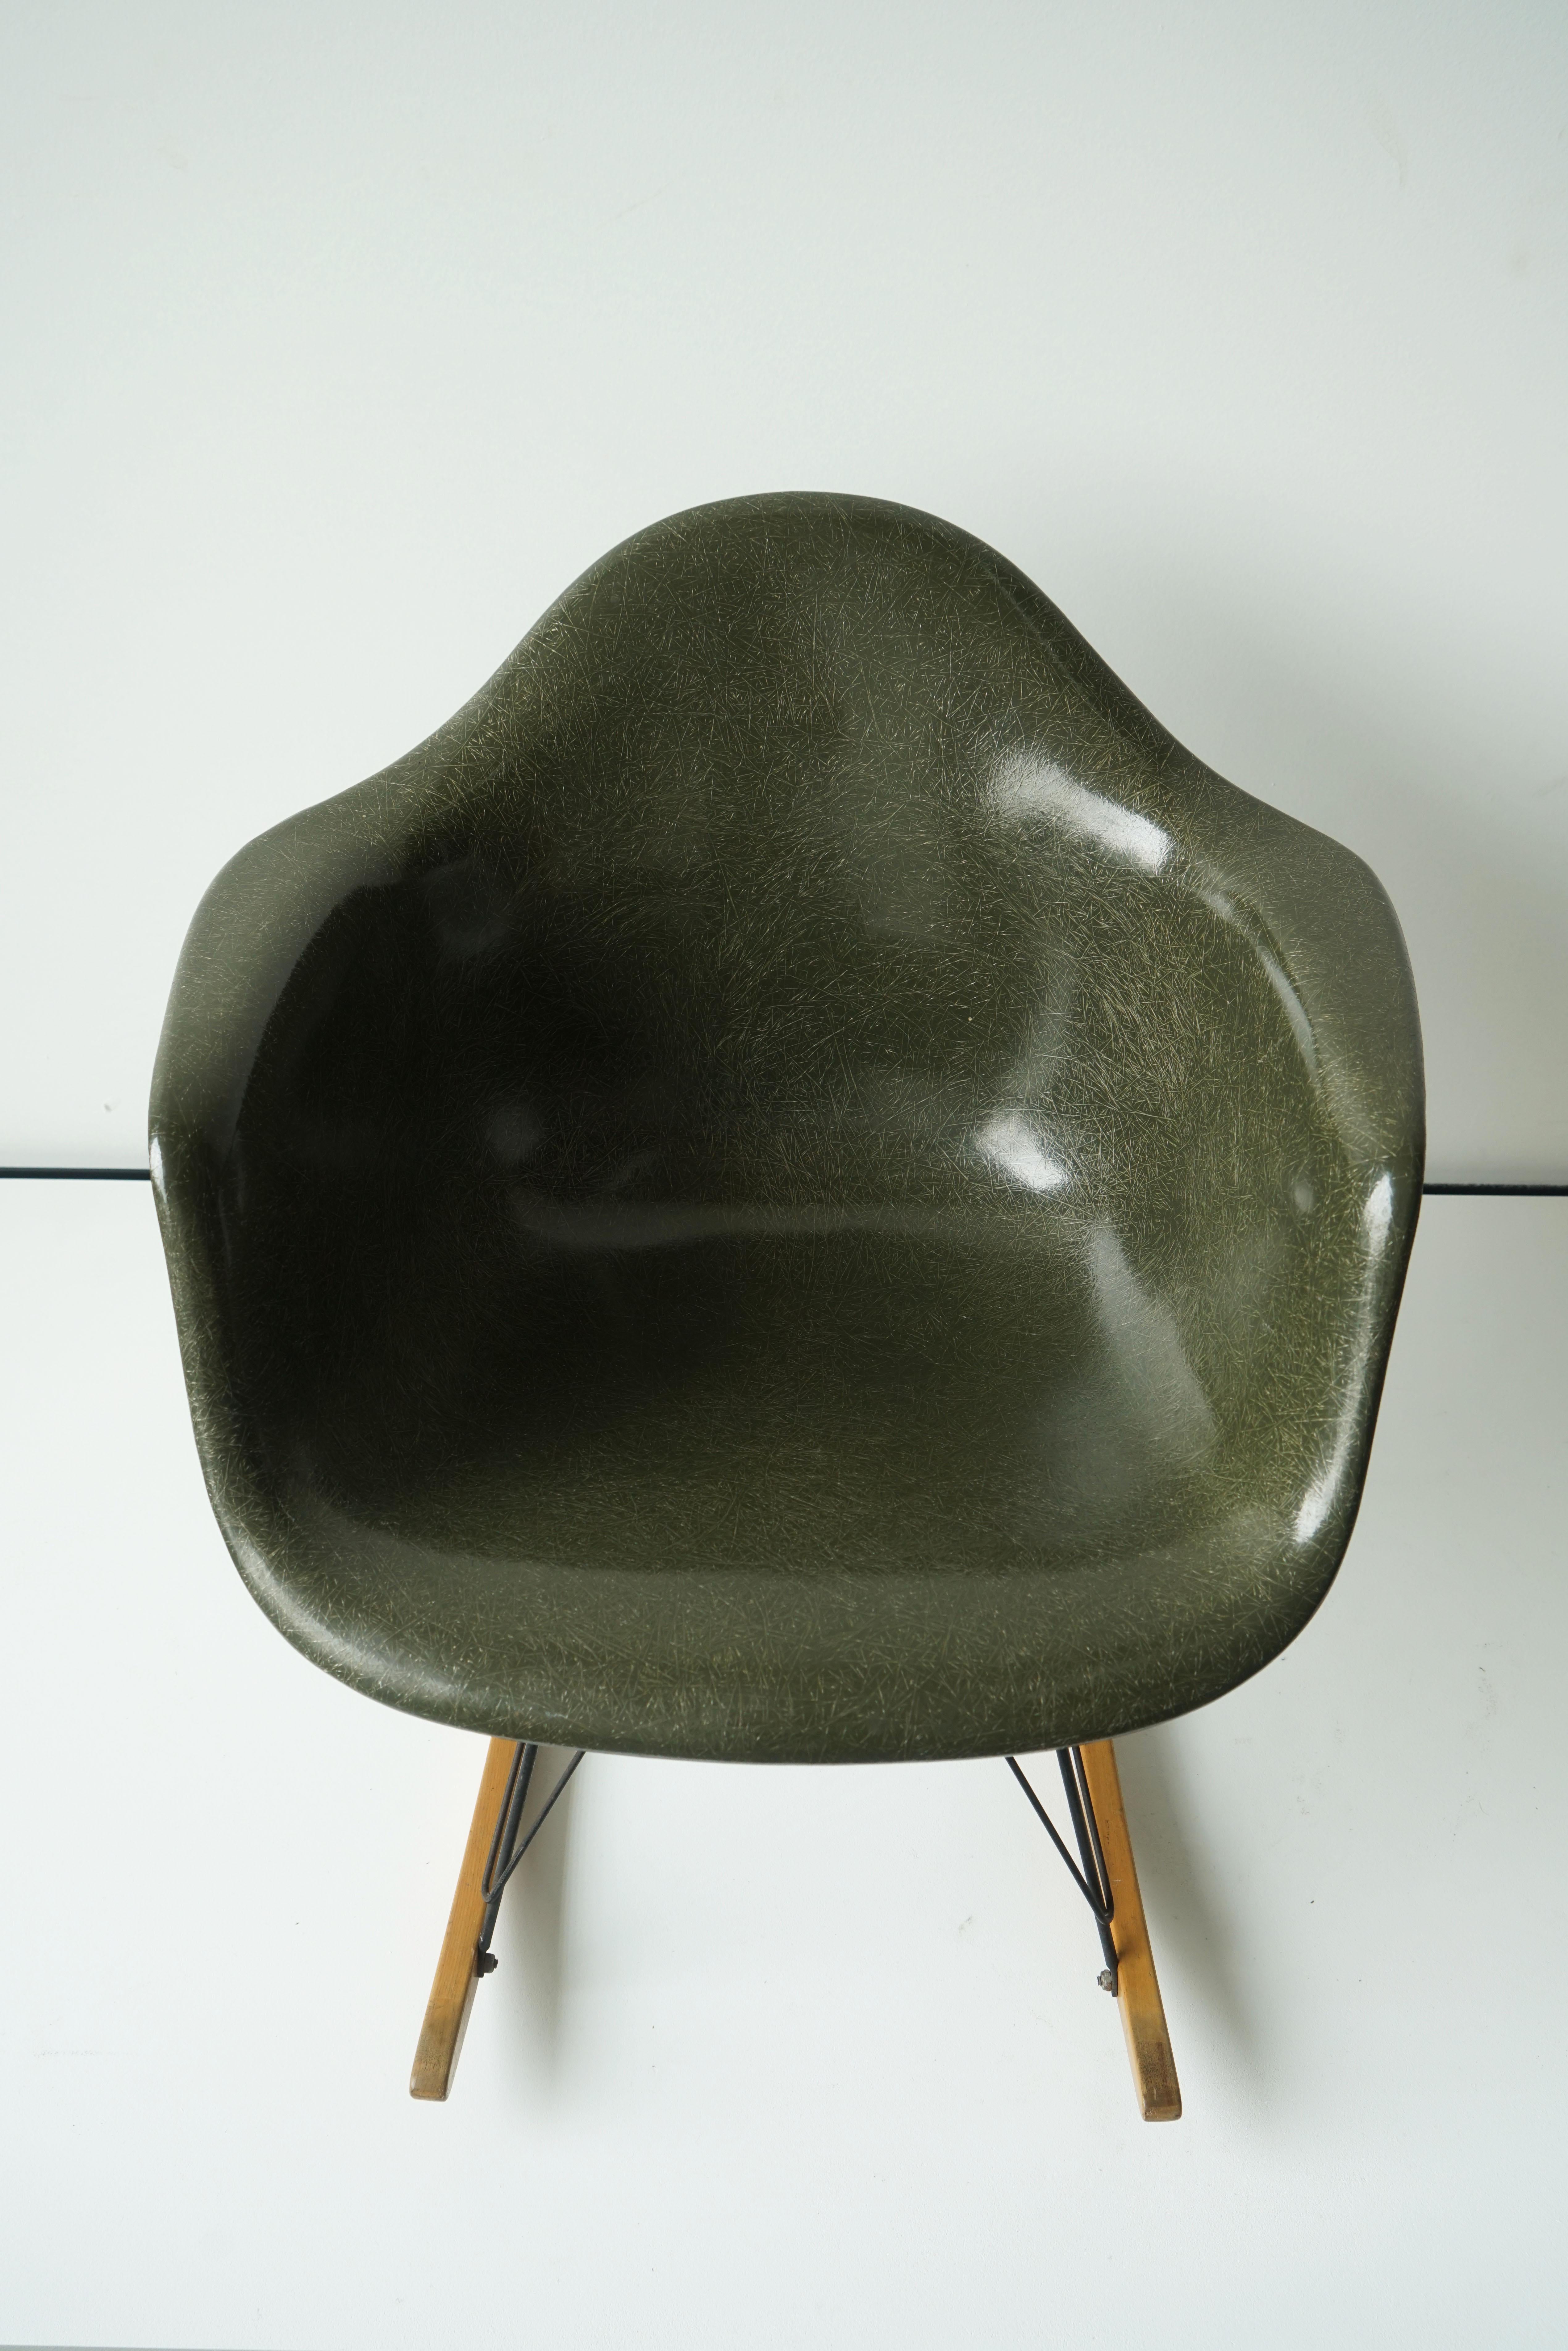 Fiberglass Ray and Charles Eames Rar Rocking Chair Herman Miller, Forest Green 1965